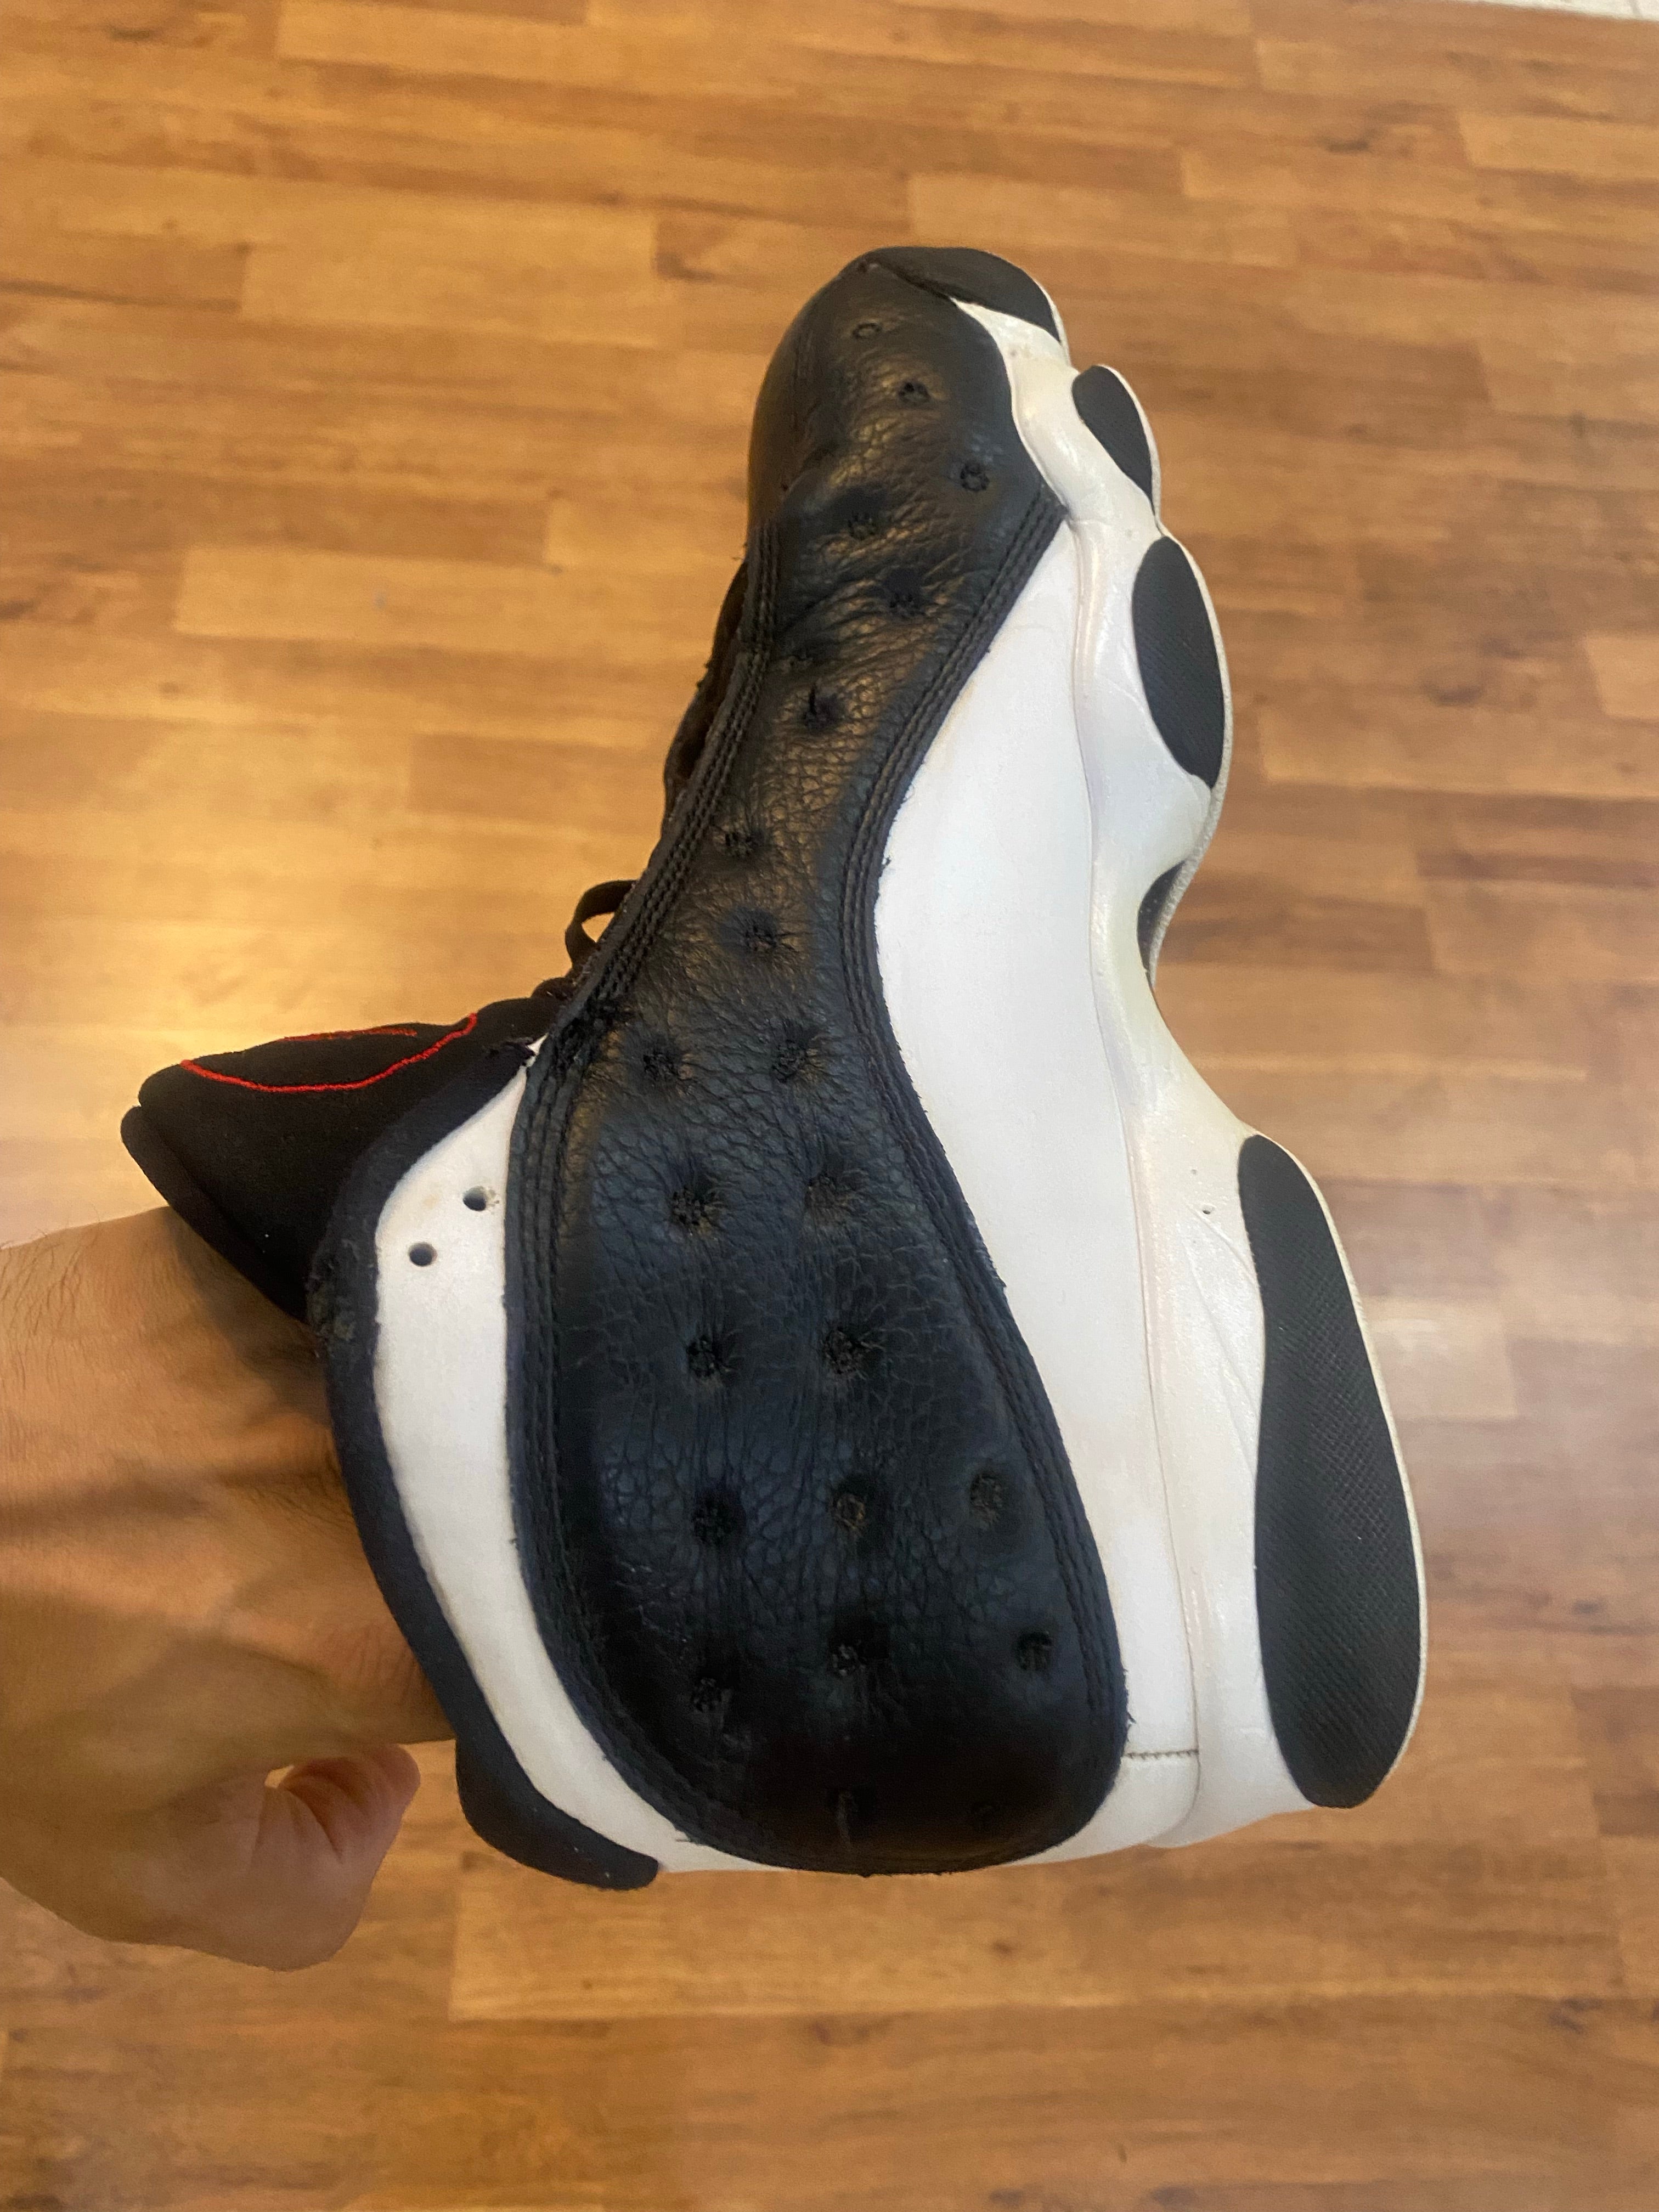 Reverse He got Game 13s size 8.5